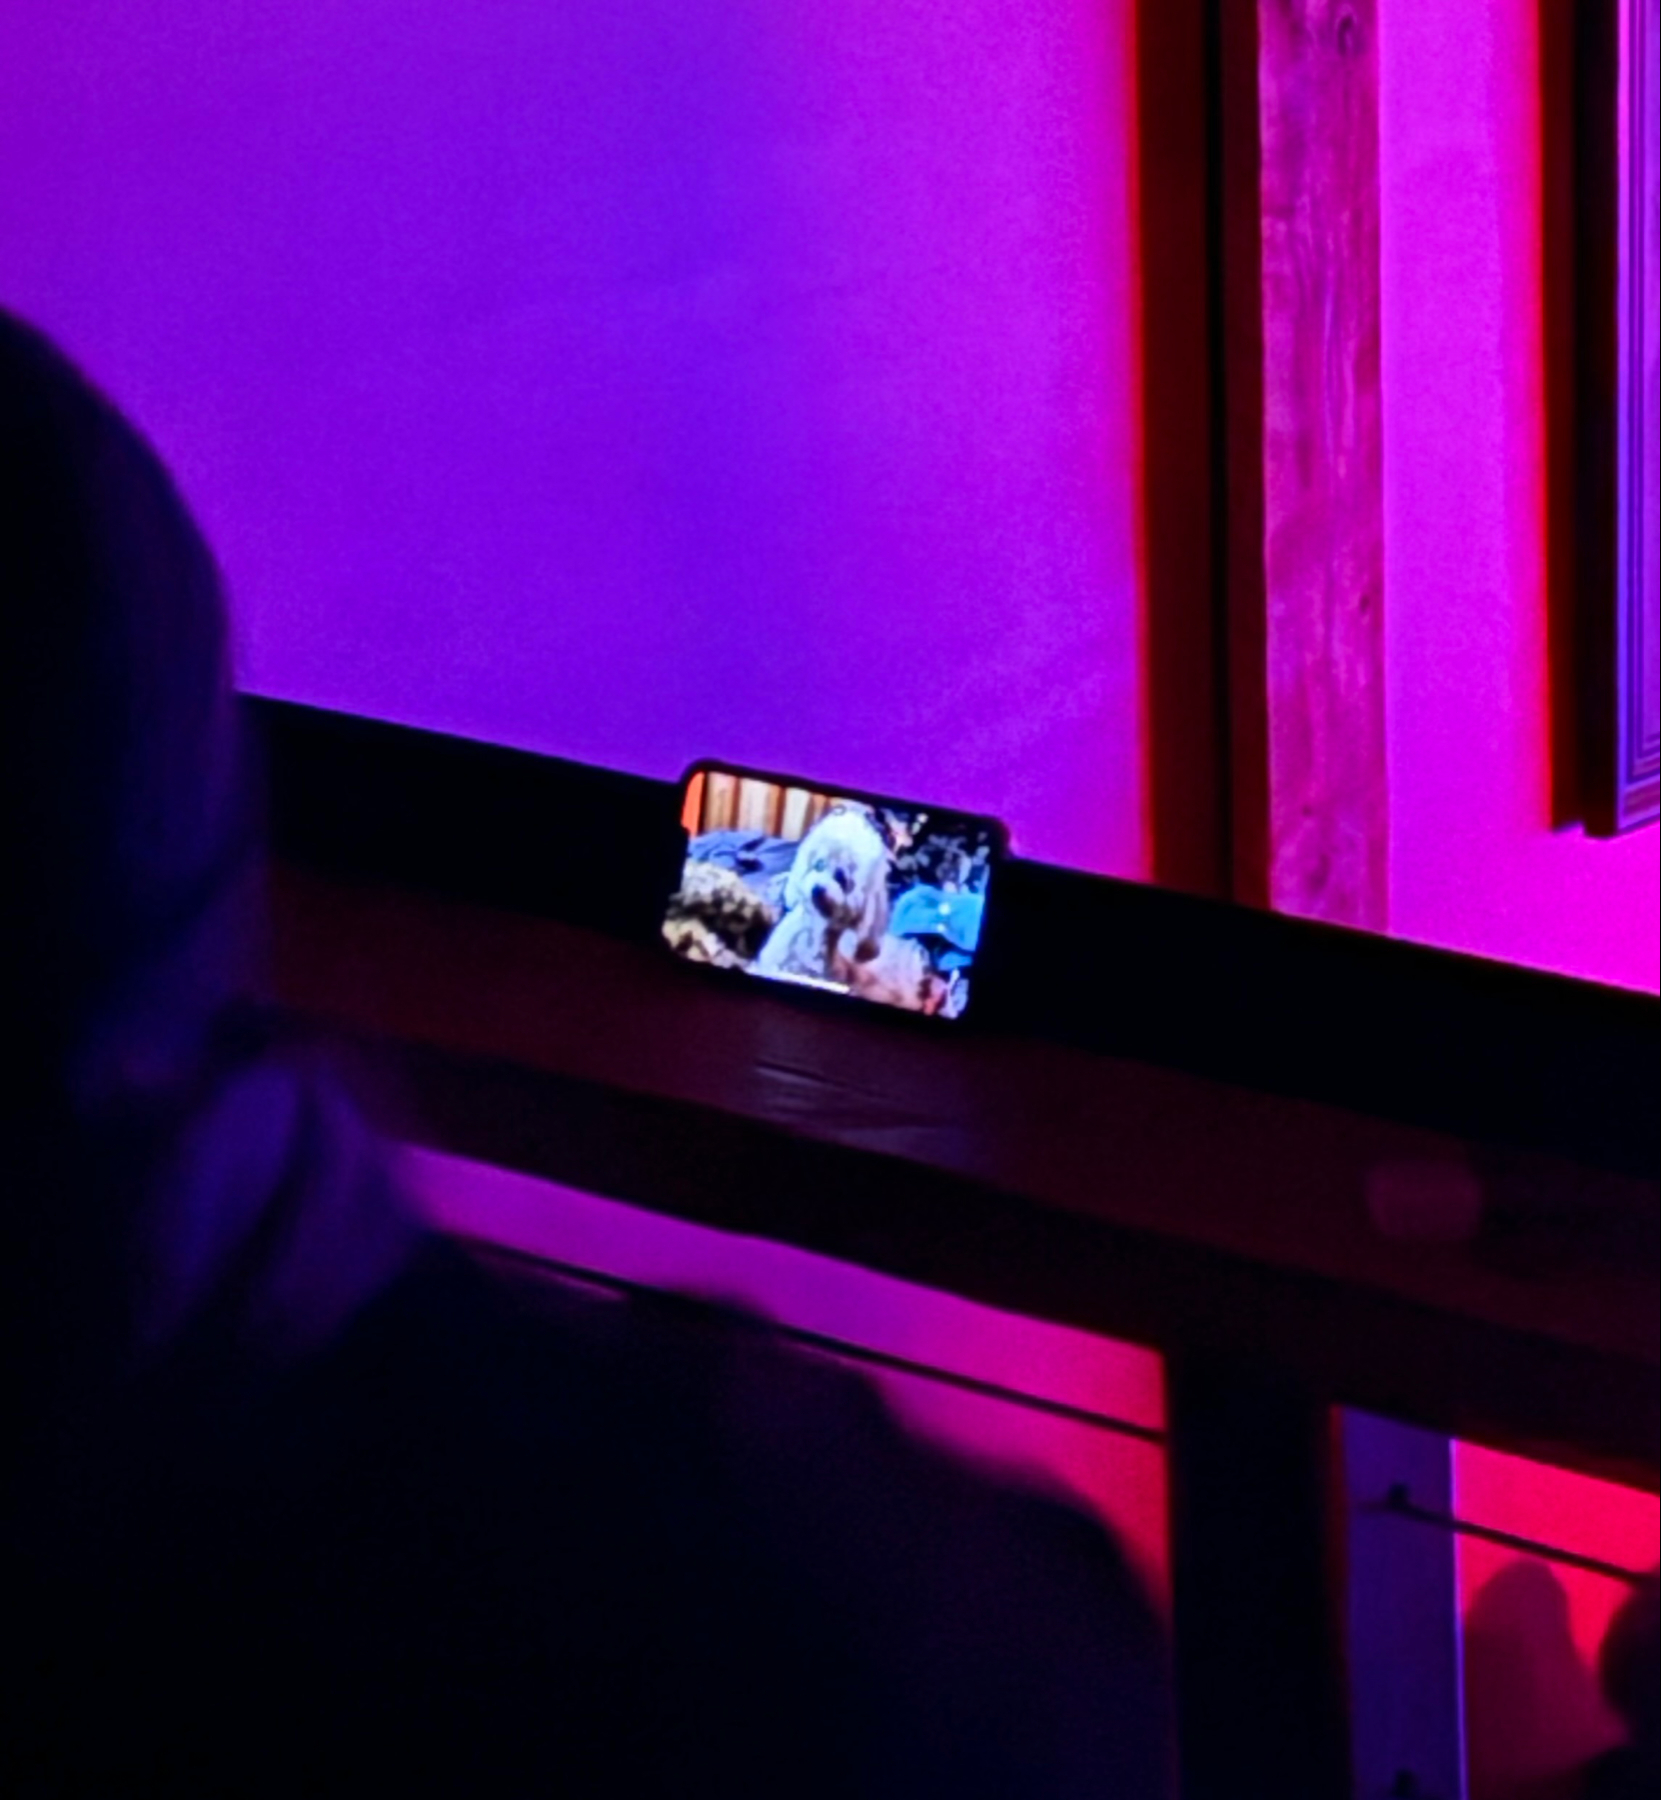 A smartphone resting on a shelf showing a video with a dog in a brightly colored environment, with a purple and pink neon light background. The foreground shows the silhouette of a person’s head observing the smartphone screen.